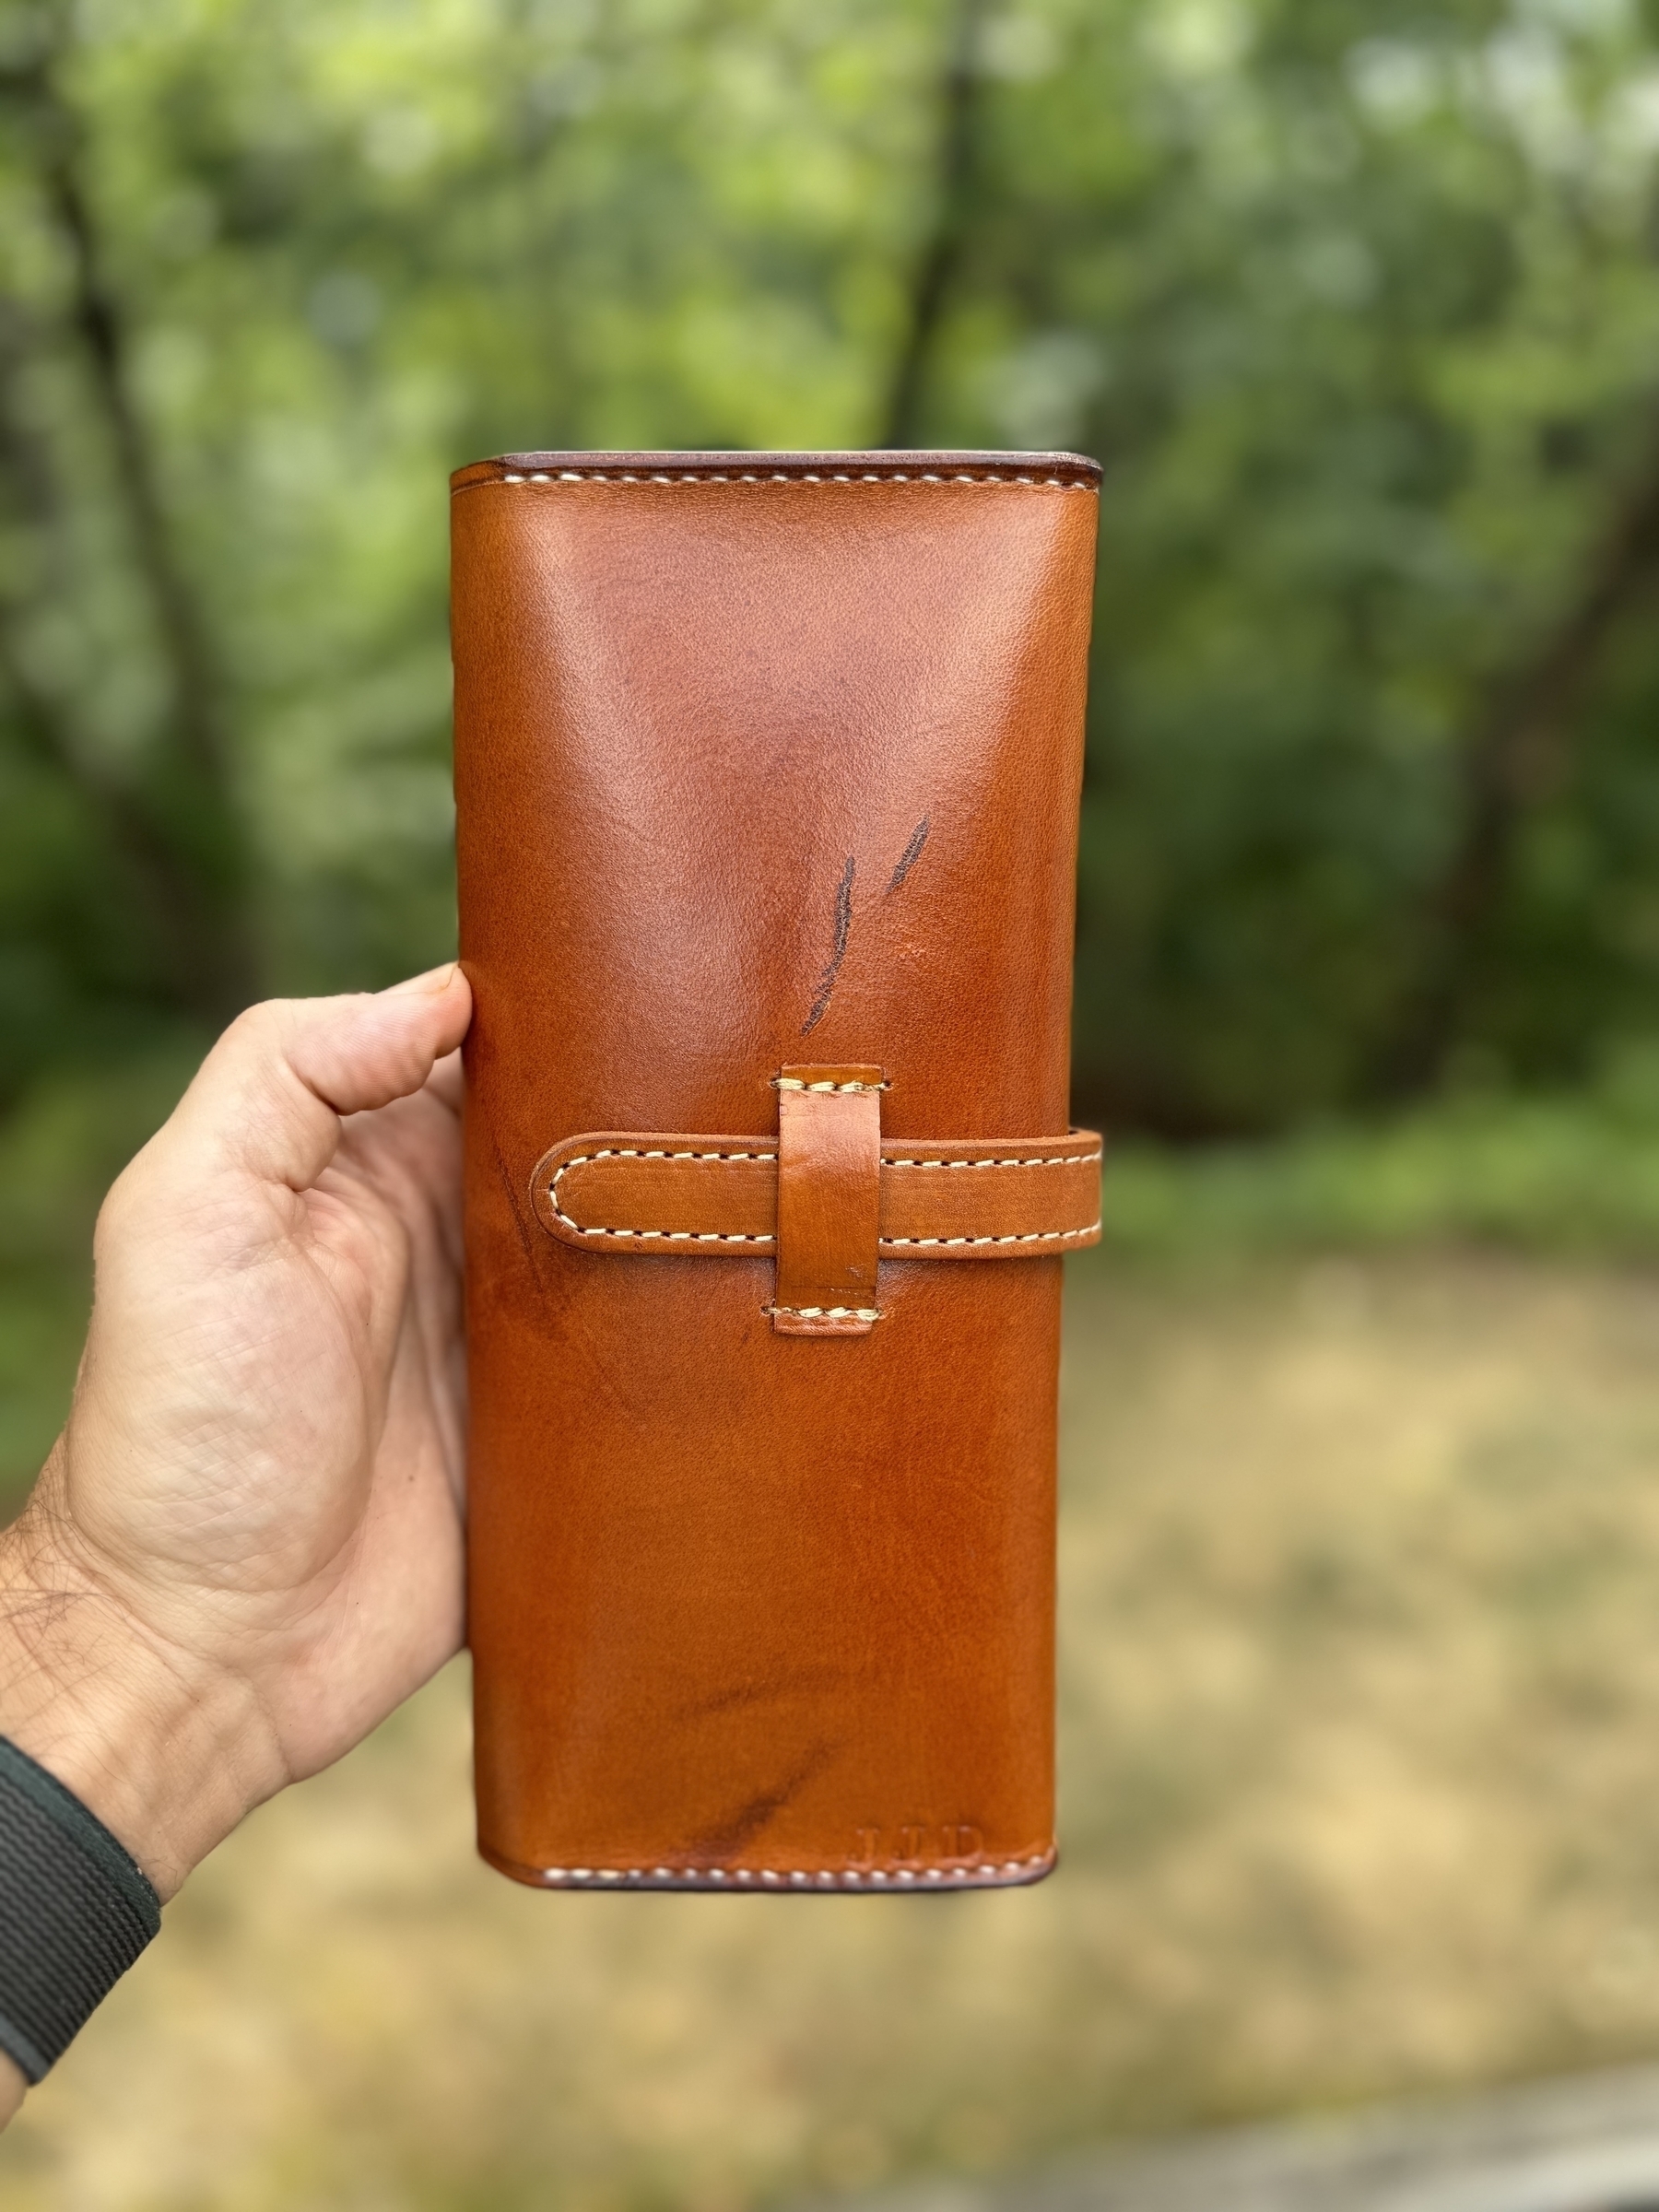 A person is holding a closed, hand-dyed in a light tan shade leather cigar case with visible stitching, against a blurred outdoor background.